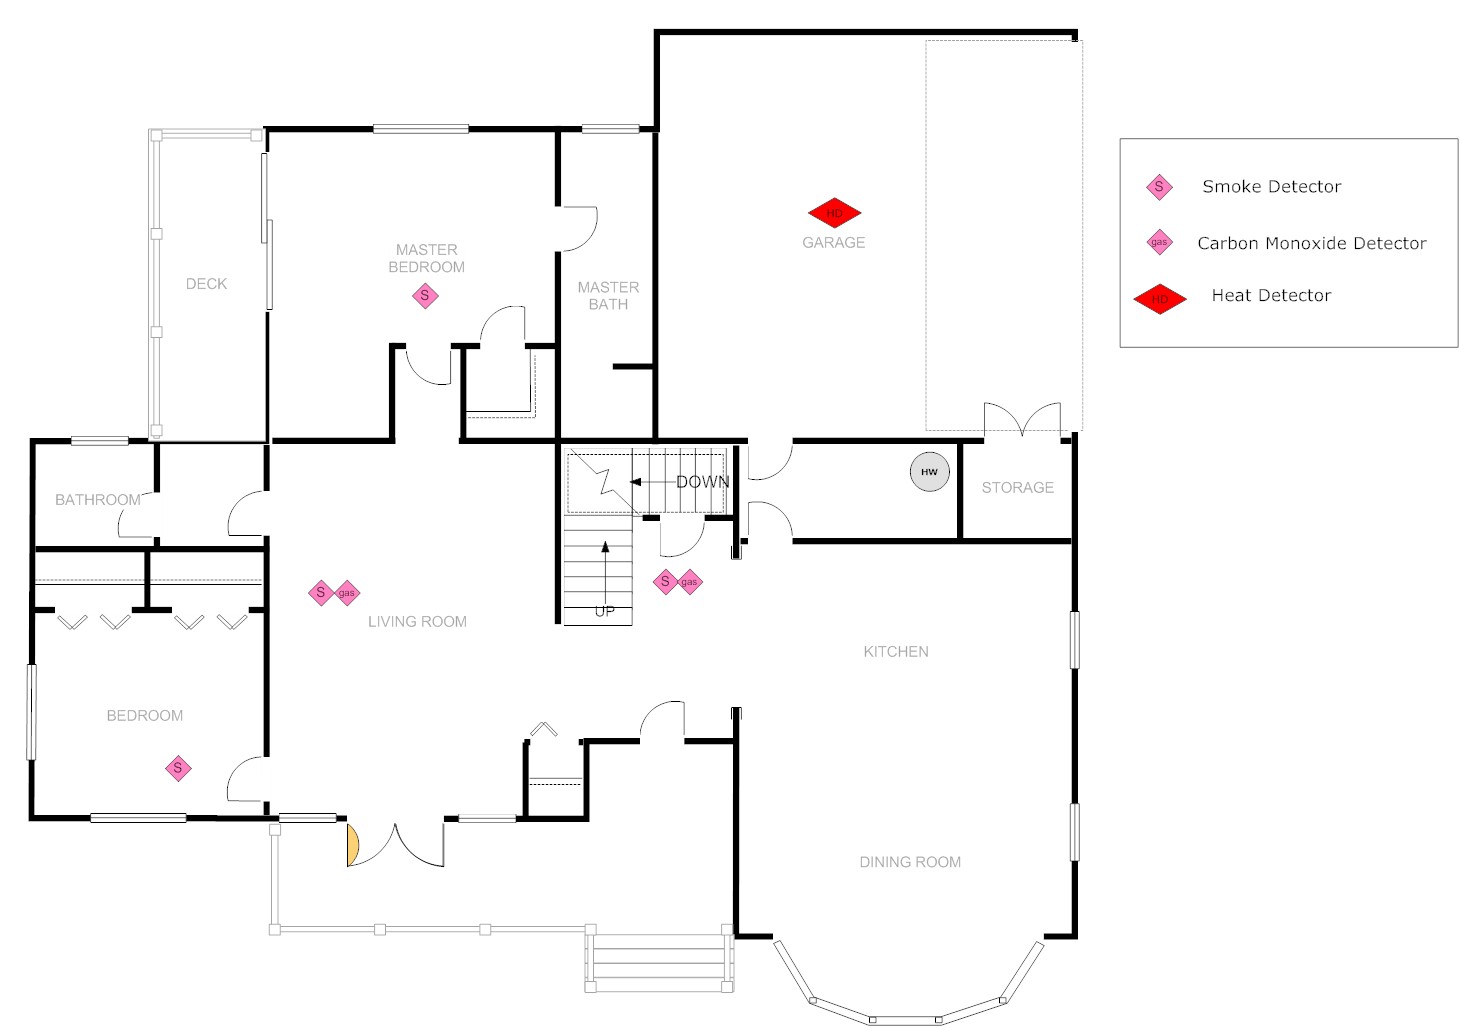 A floor plan detailing smoke detection per 2008 fire alarm requirements. 